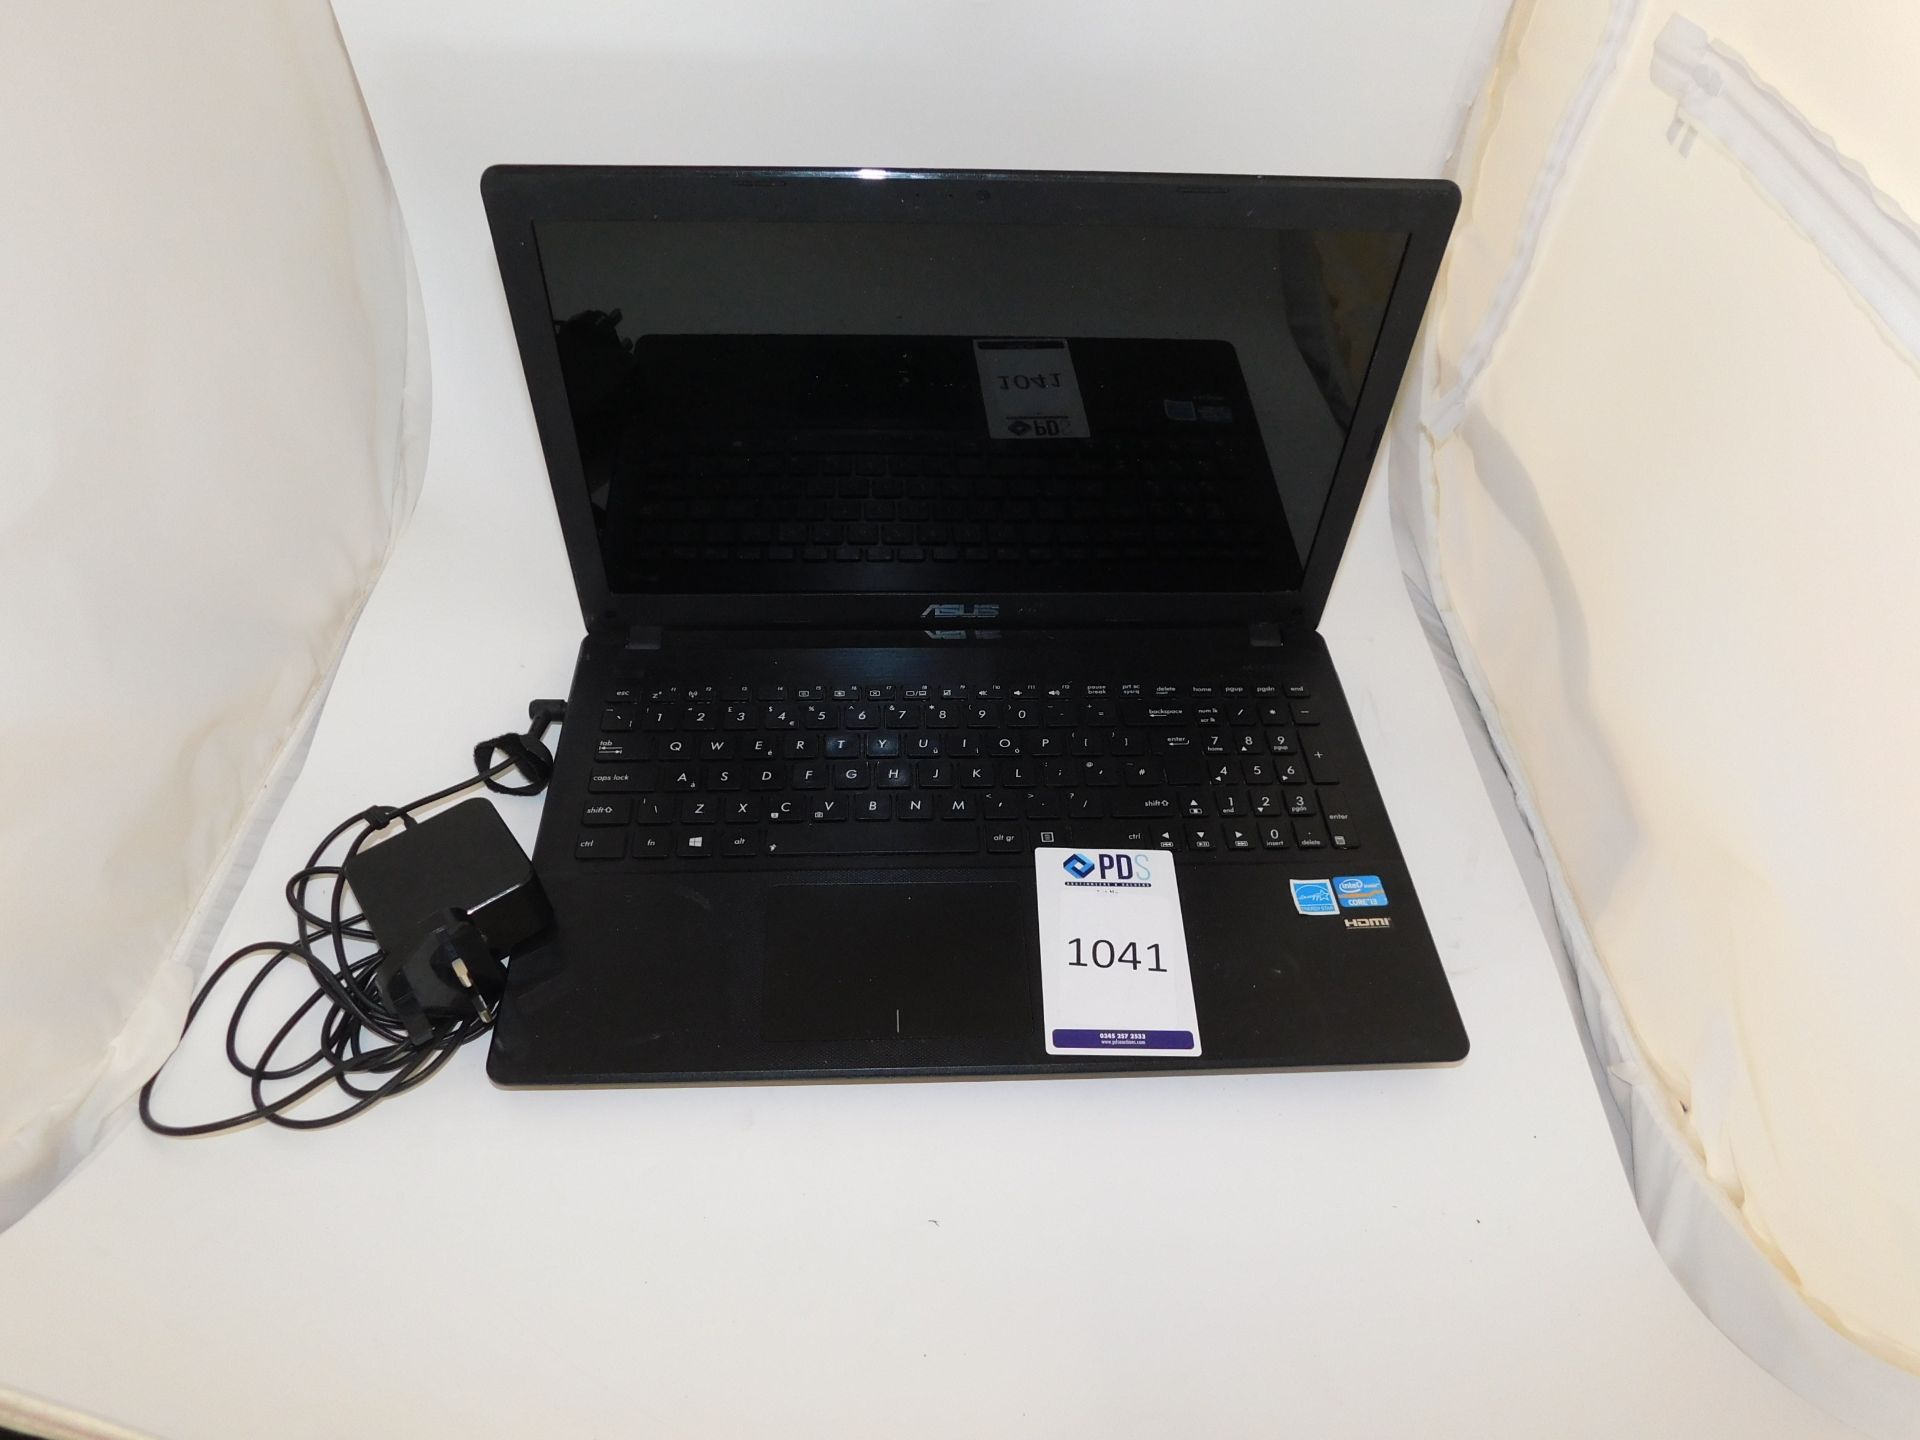 Asus X551C Laptop, i3 (No HDD) (Location Stockport. Please Refer to General Notes)